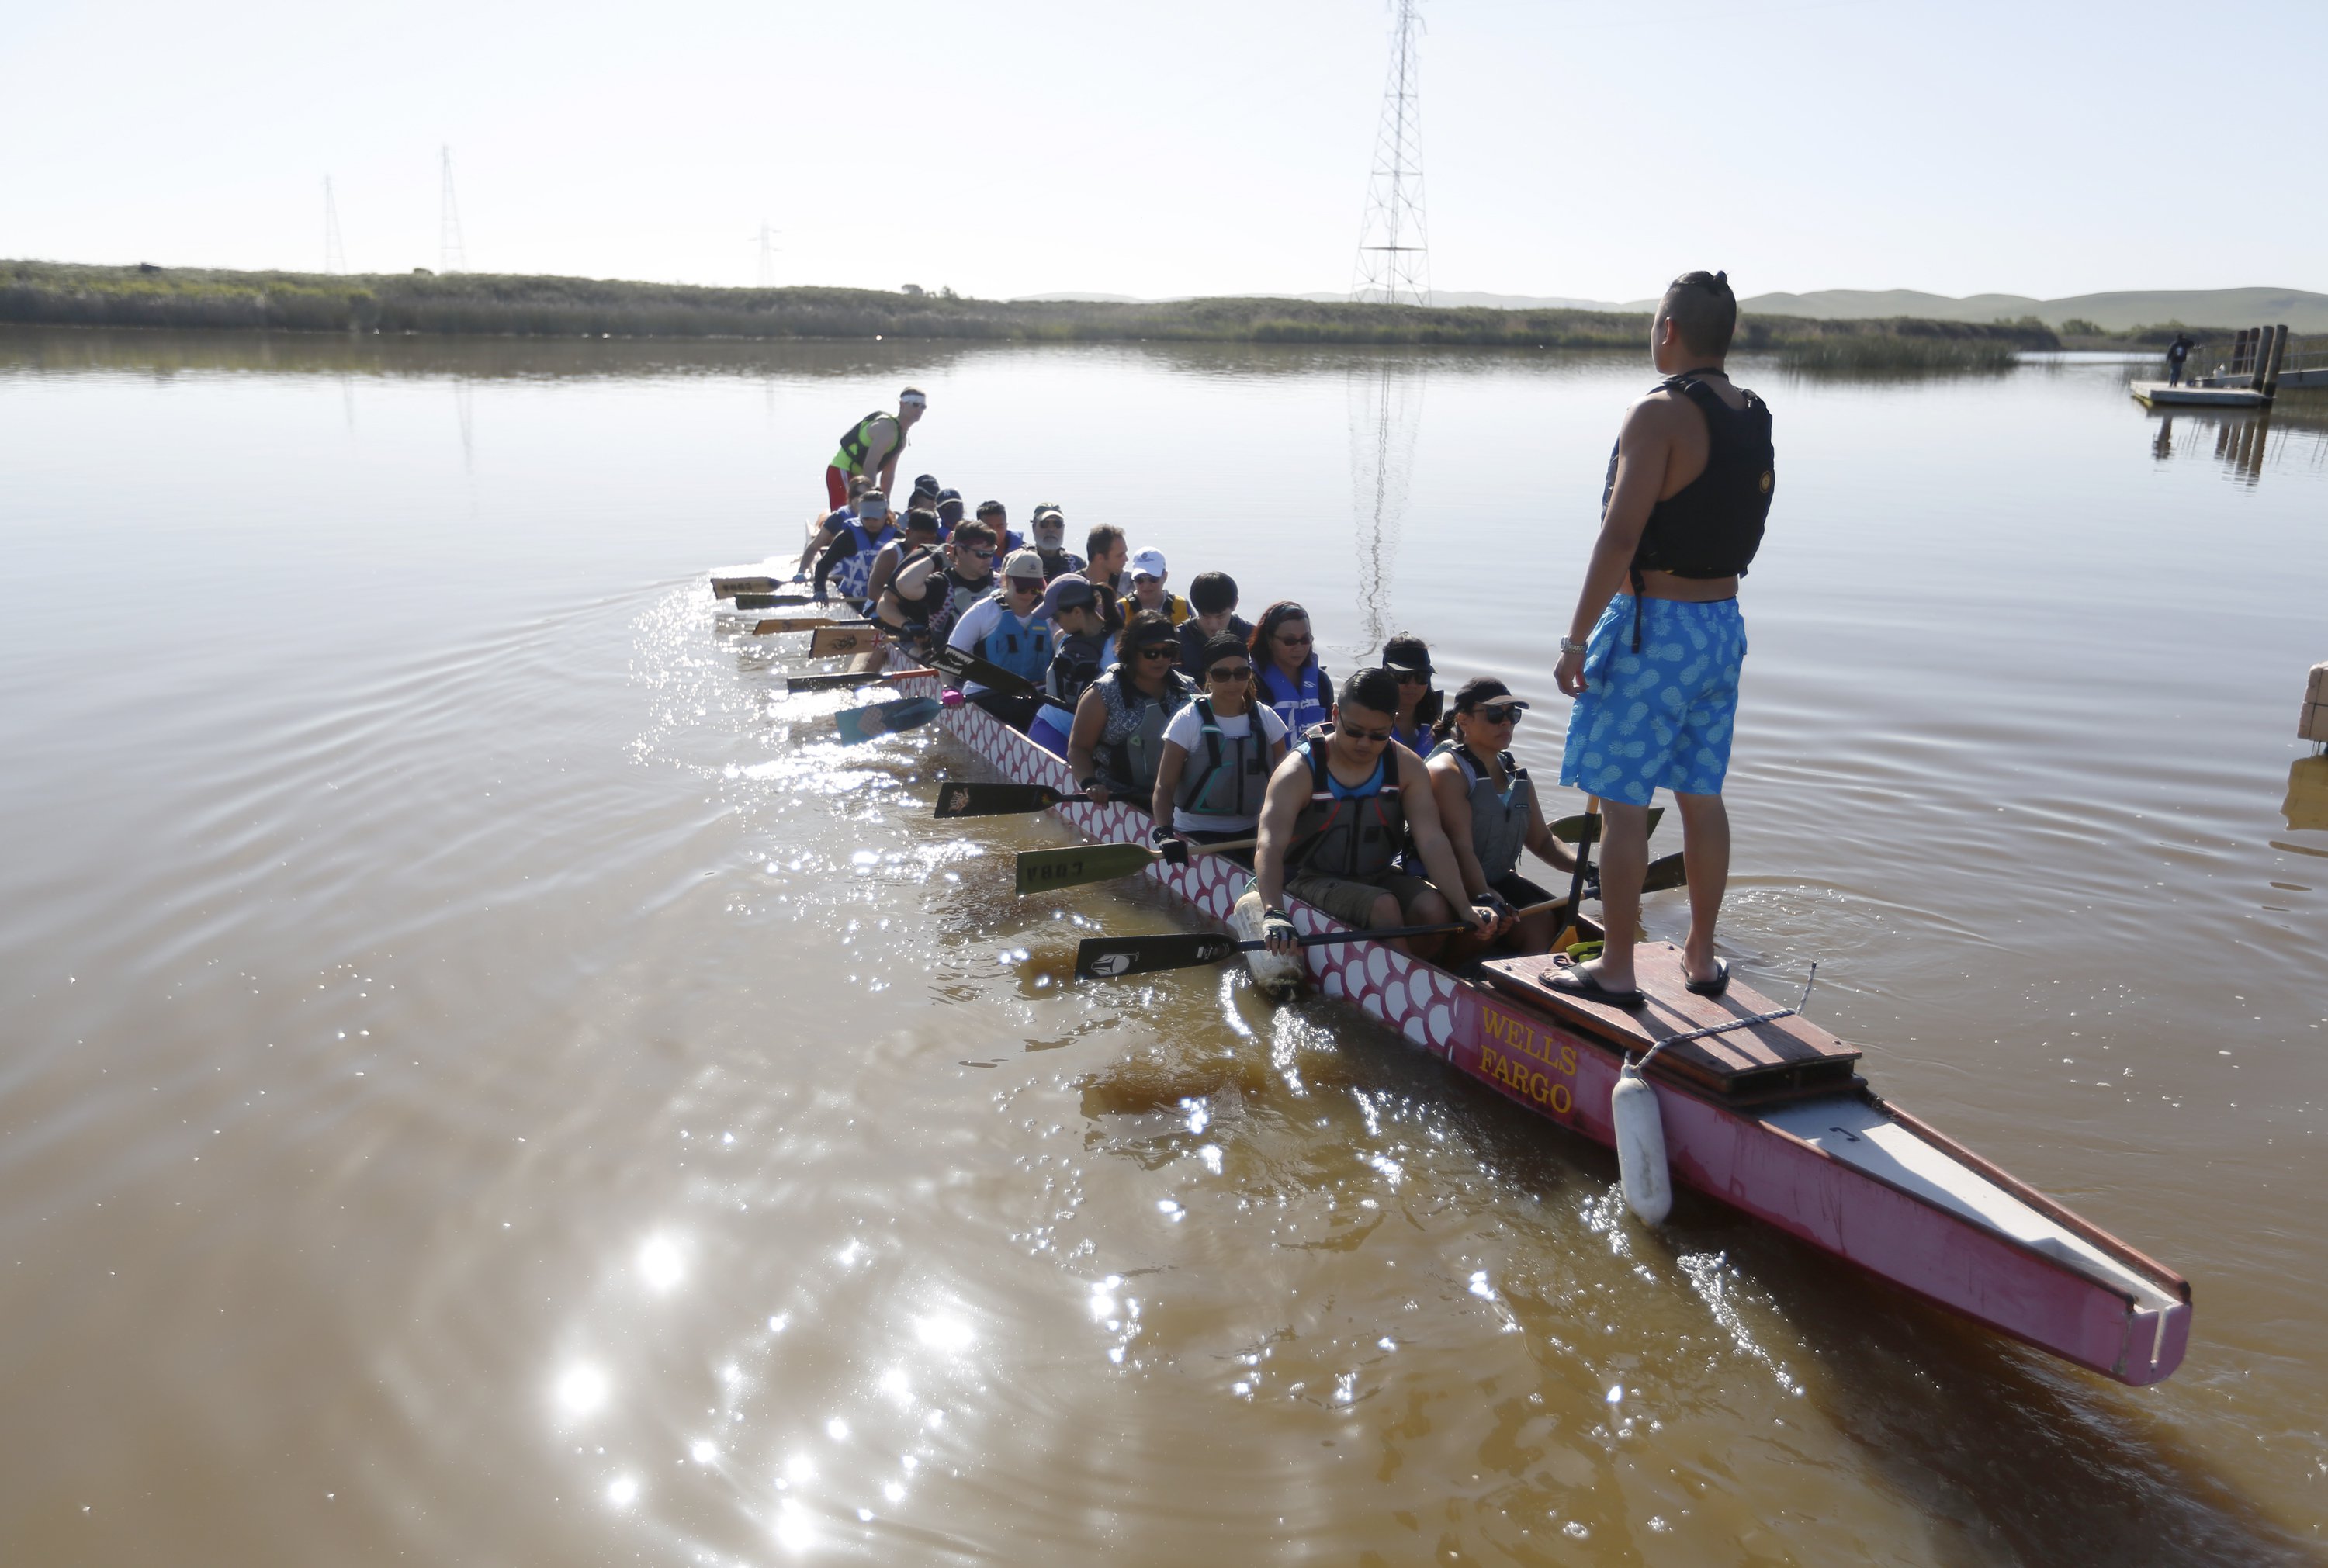 Dragon boat racers find home, calm waters in Suisun City